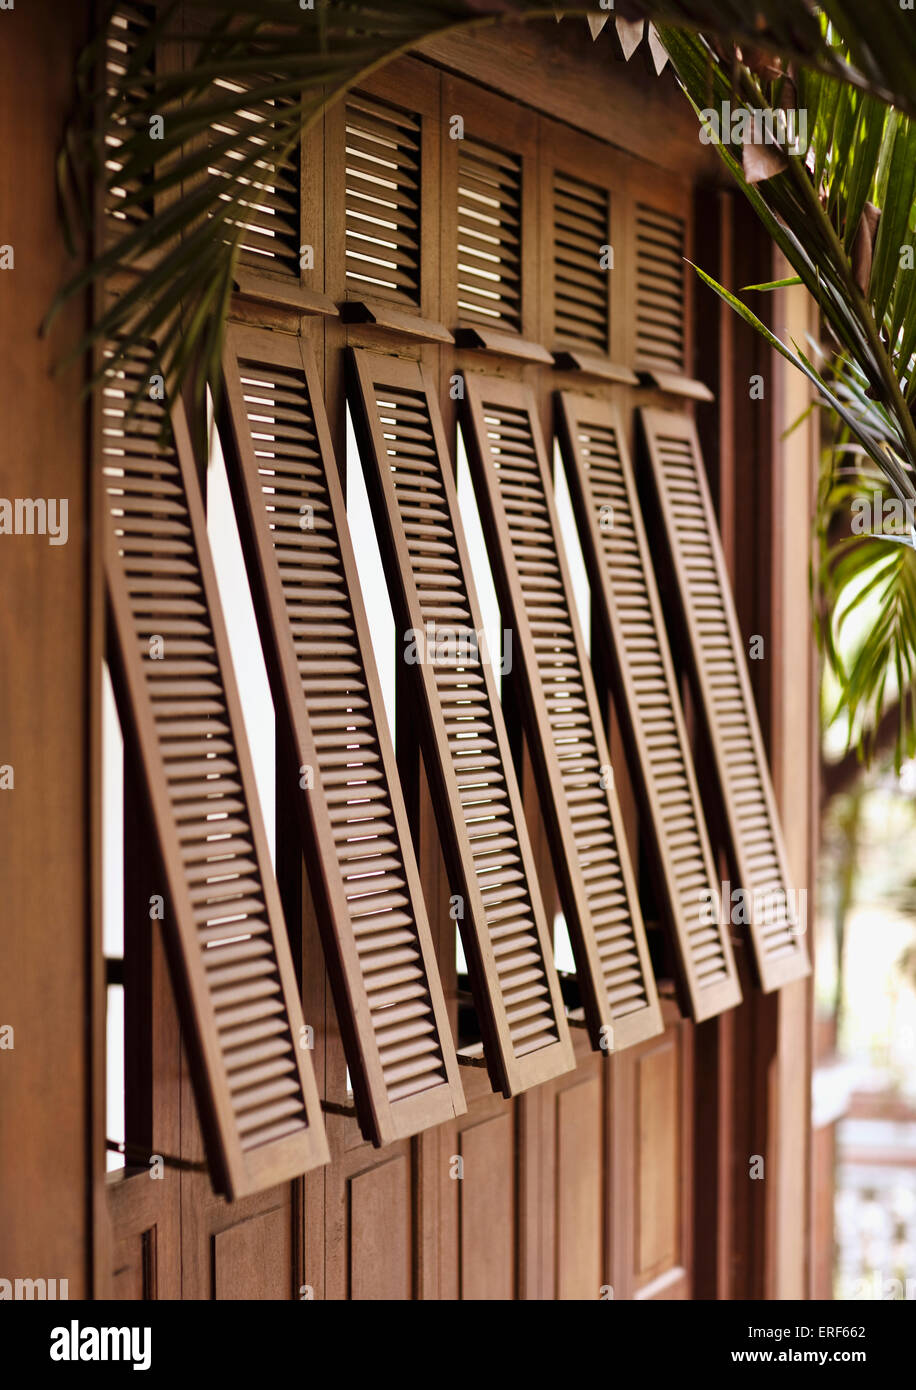 An exterior shot of French-style shutters at La Residence d'Angkor, Siem Reap, Cambodia. Stock Photo